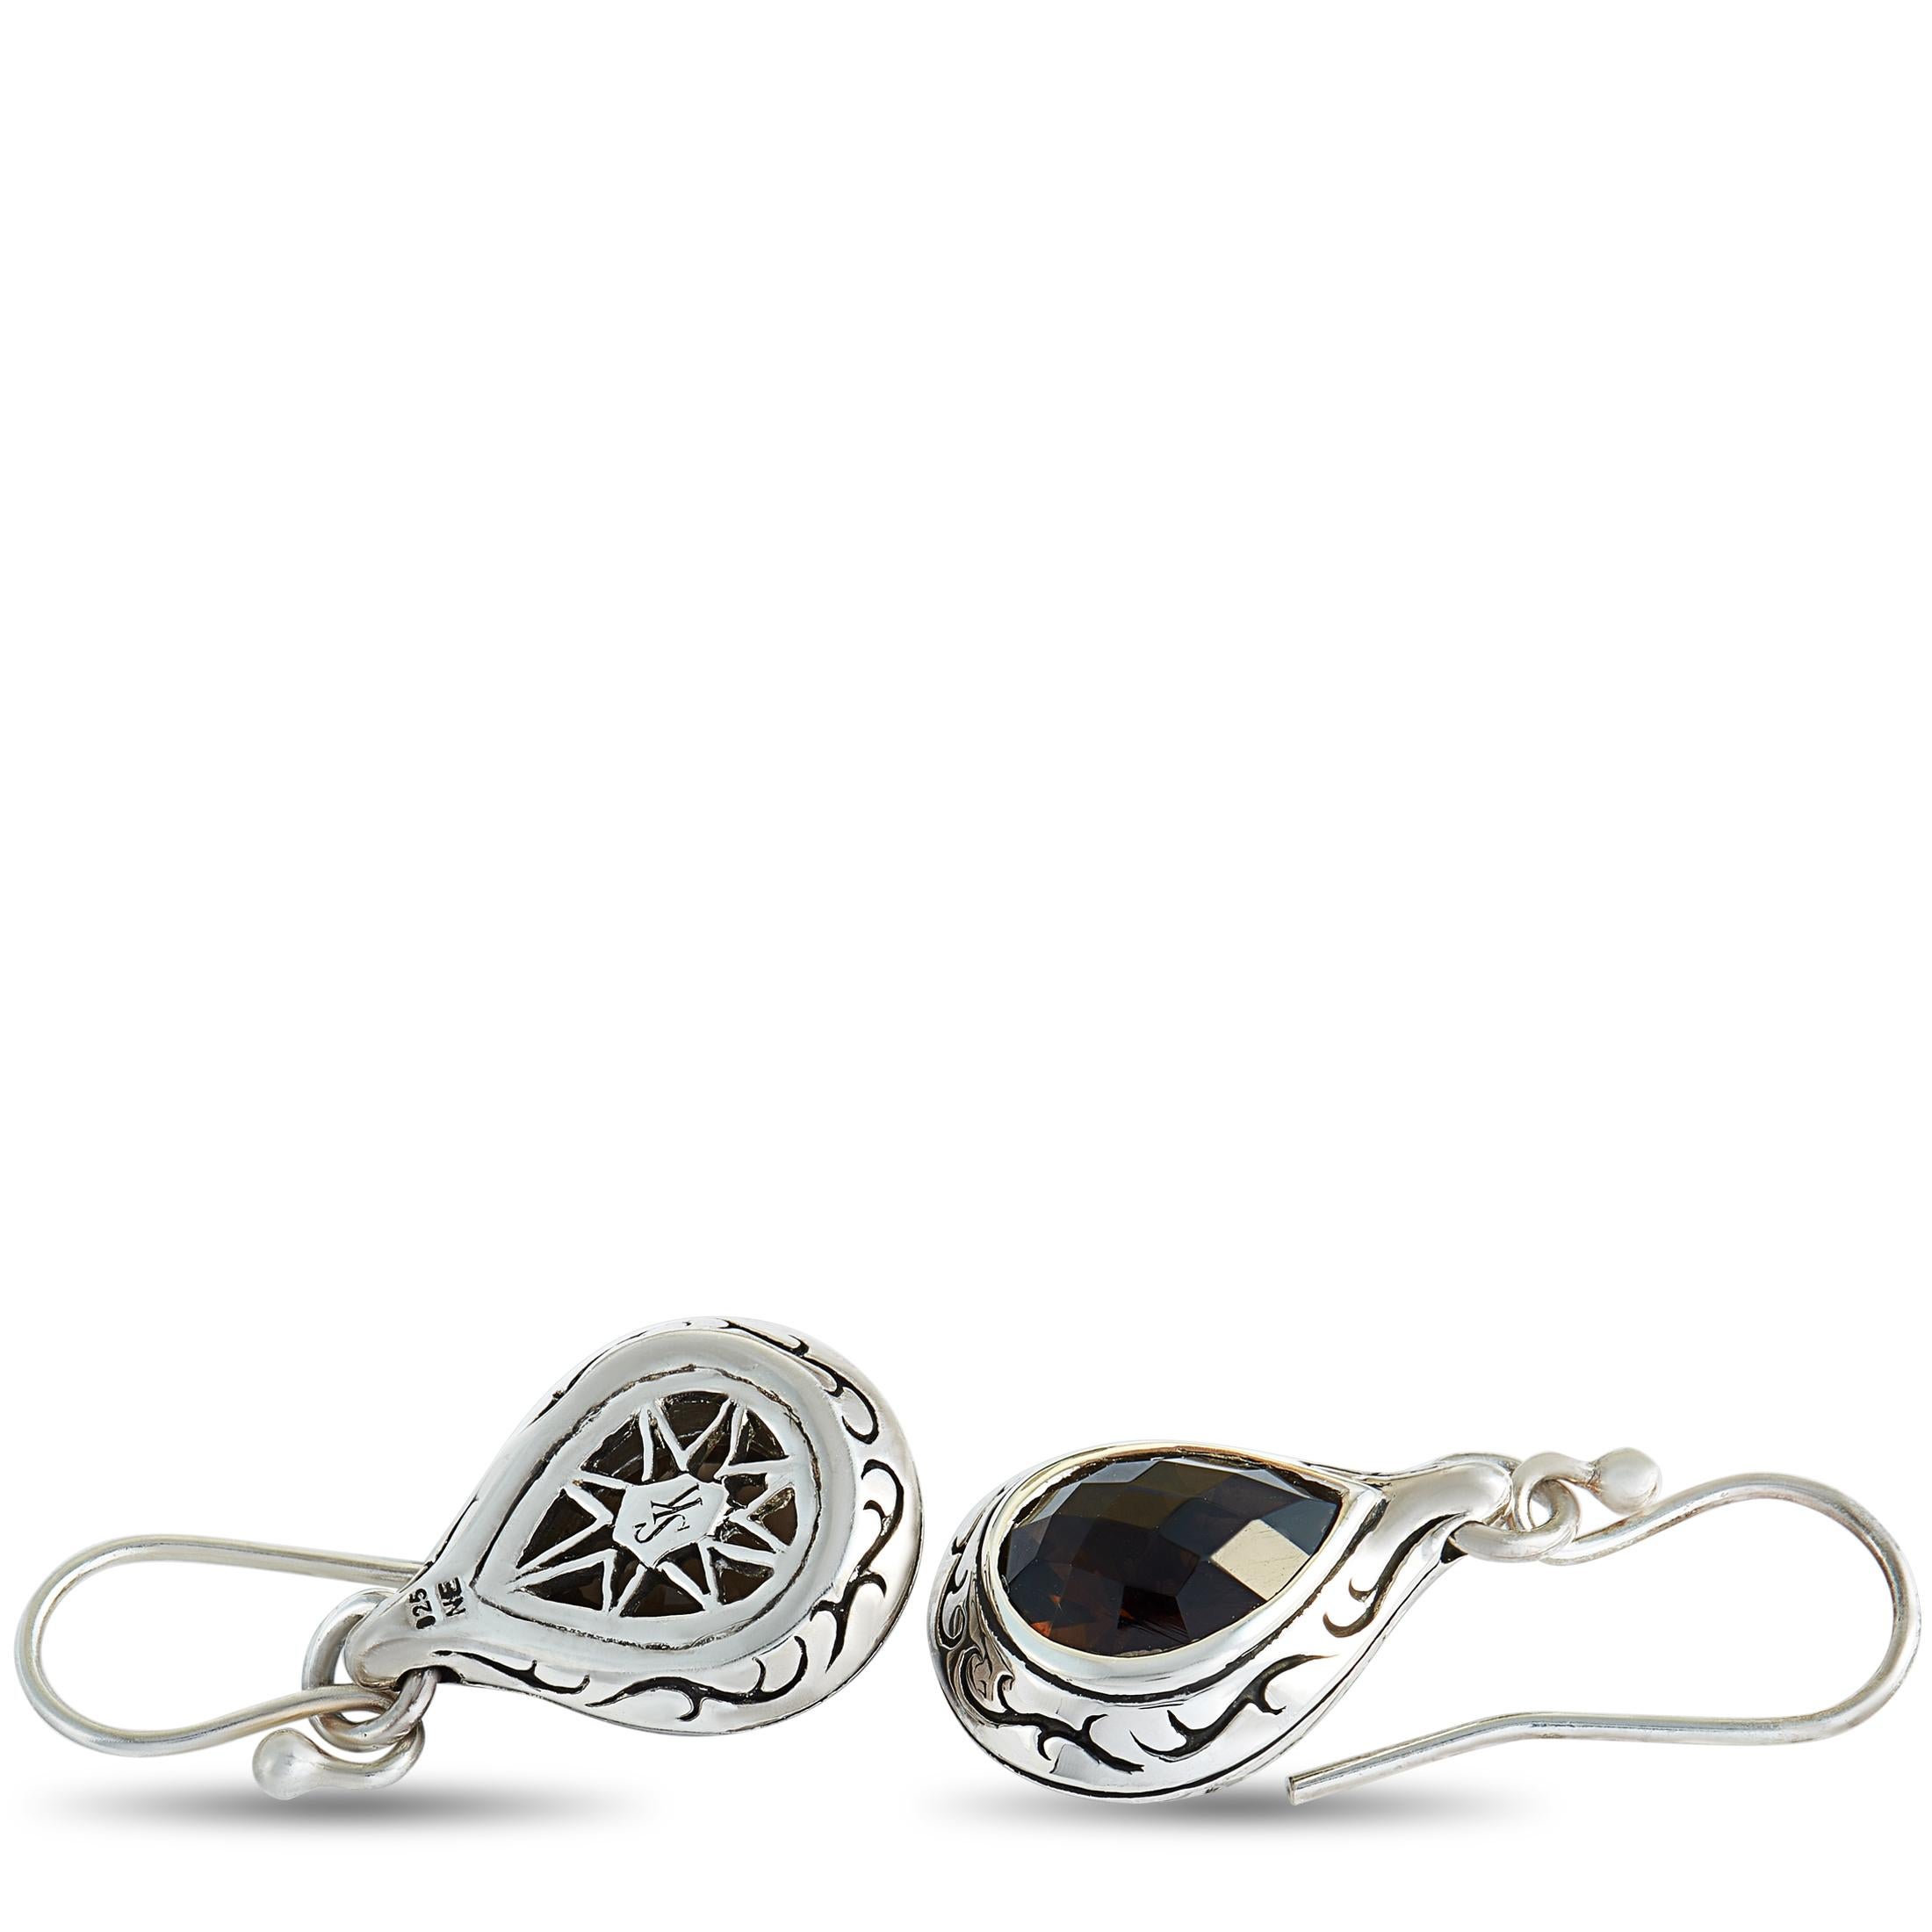 These Scott Kay earrings are made of sterling silver and embellished with smoky quartz stones. The earrings measure 1.20” in length and 0.50” in width and each of the two weighs 3.75 grams.

Offered in brand new condition, this pair of earrings